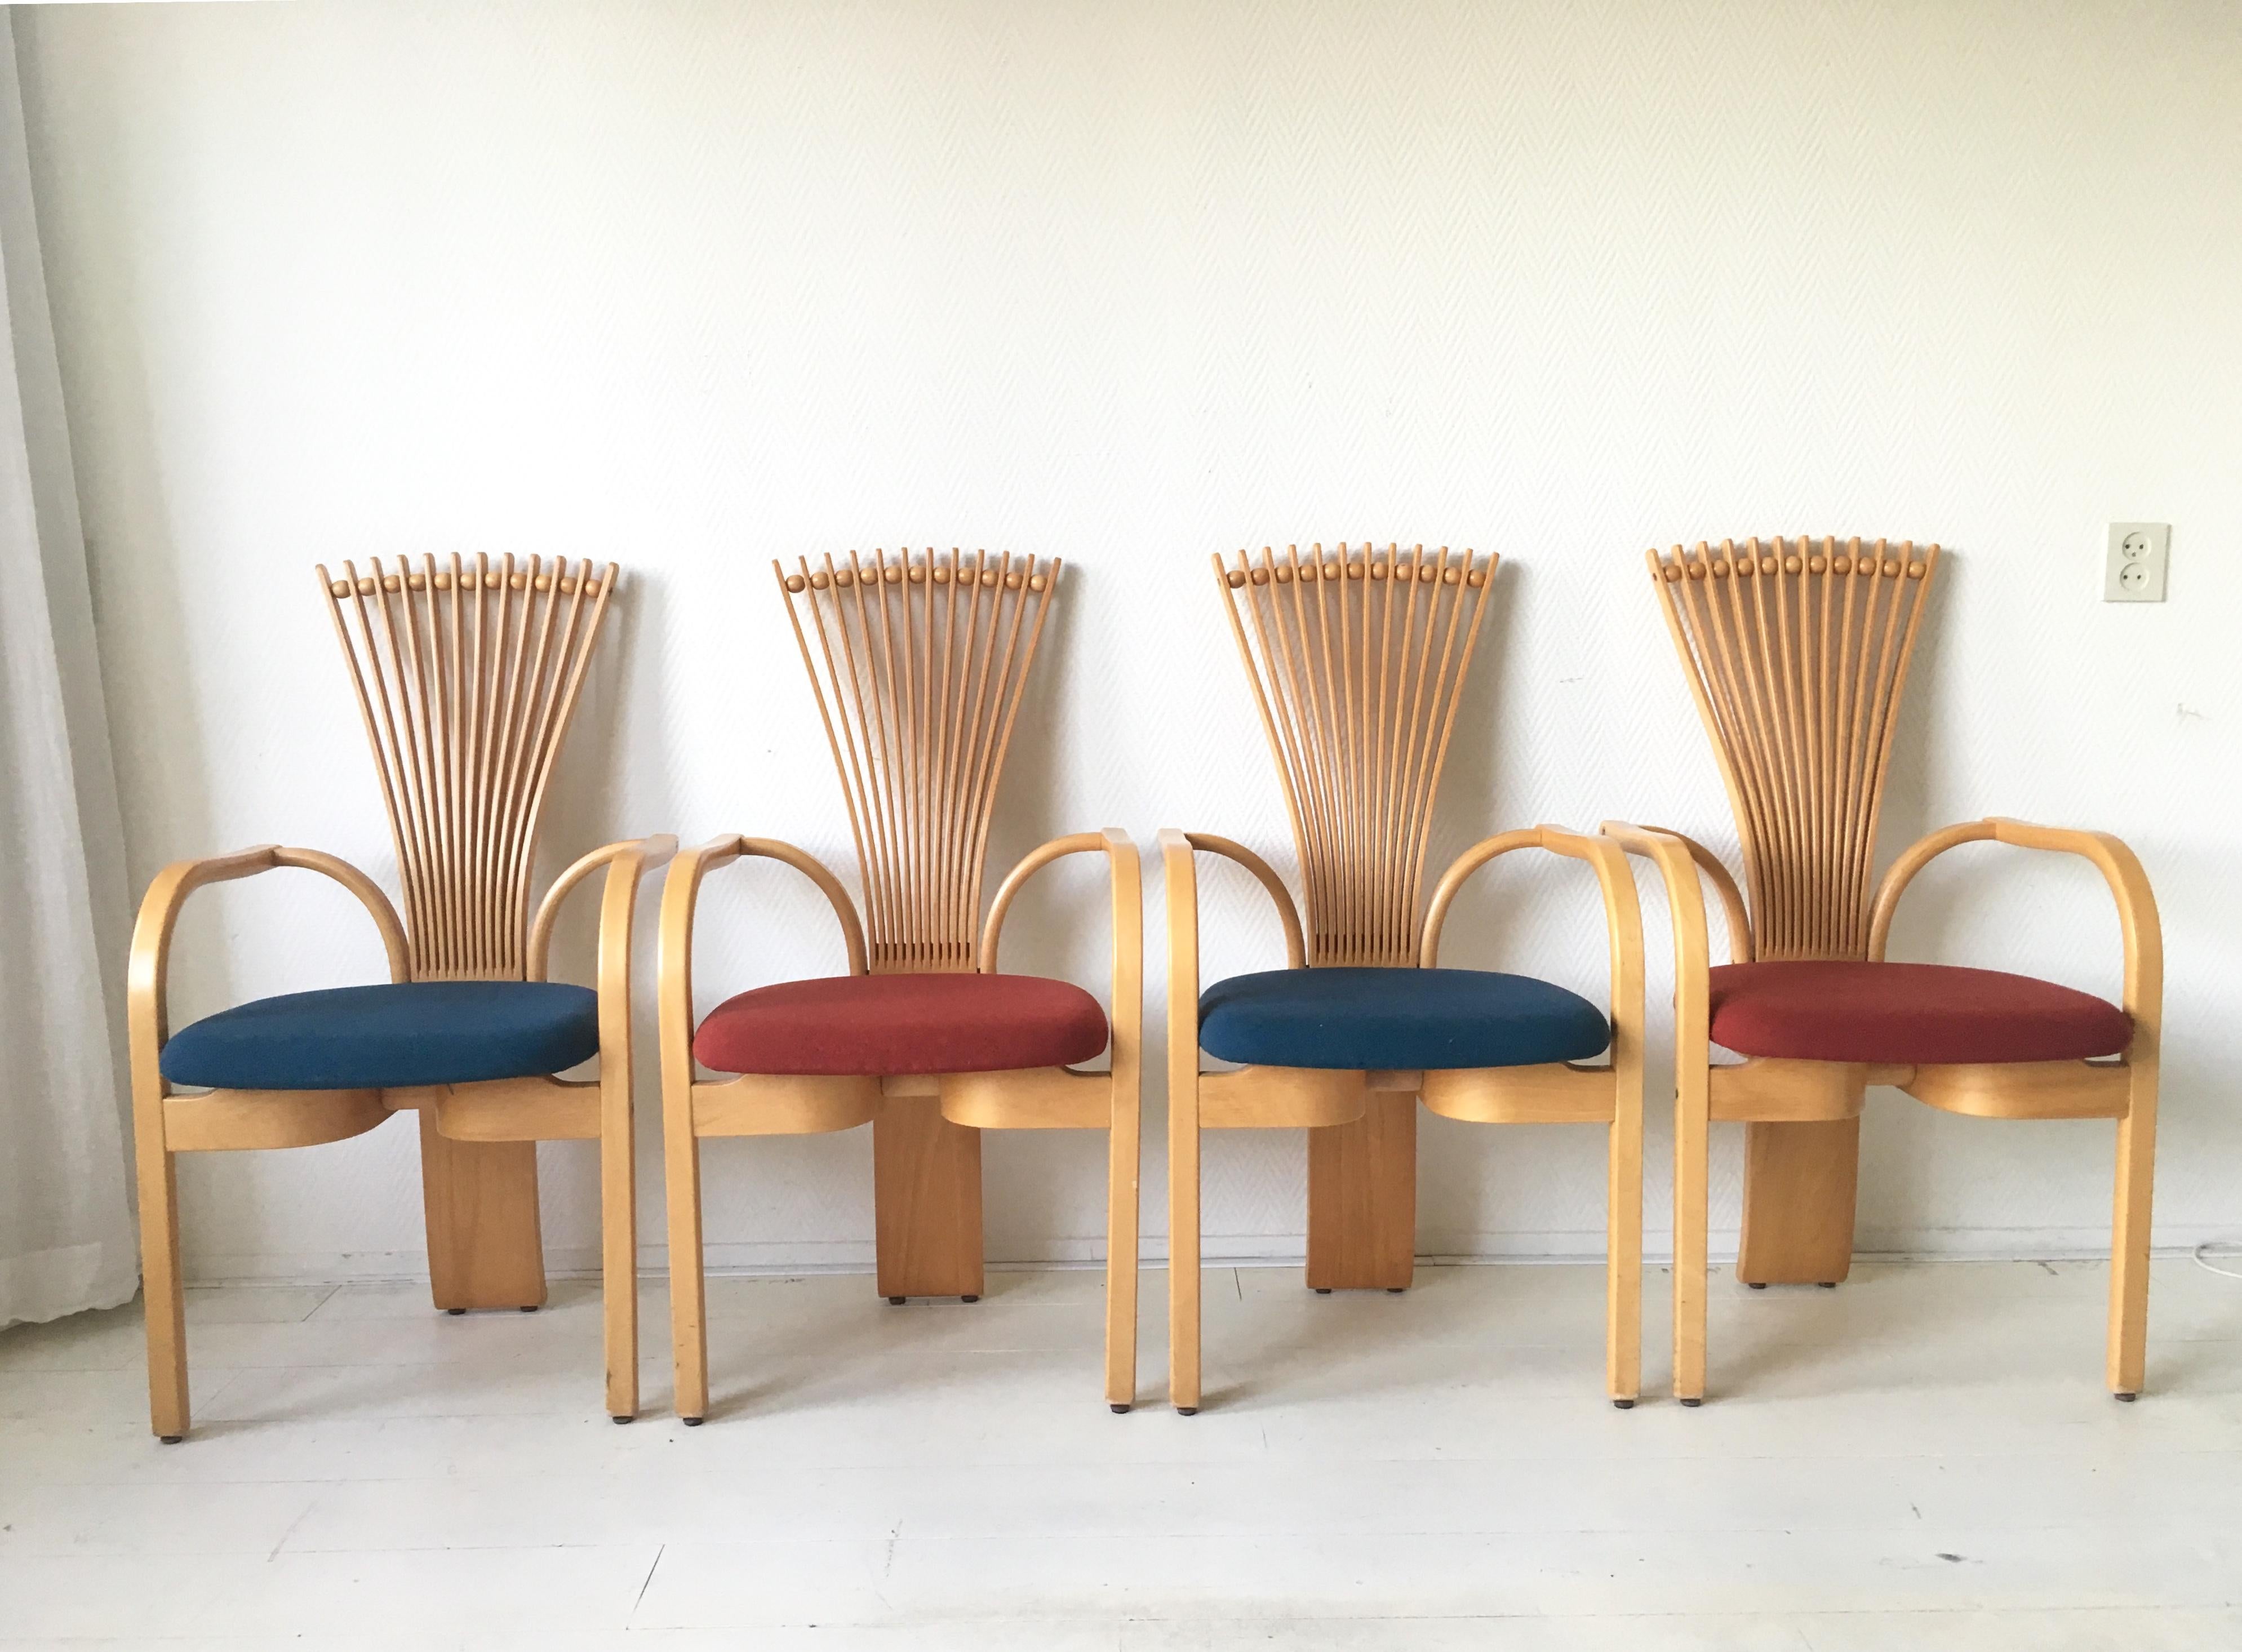 These sculptural Norwegian high back dining chairs were designed by Torstein Niksen for Westnofa. This Fan, or Totem chairs feature a massive Oak base with Blue and Red wool upholstery. If desired, they can easily be reupholstered with another